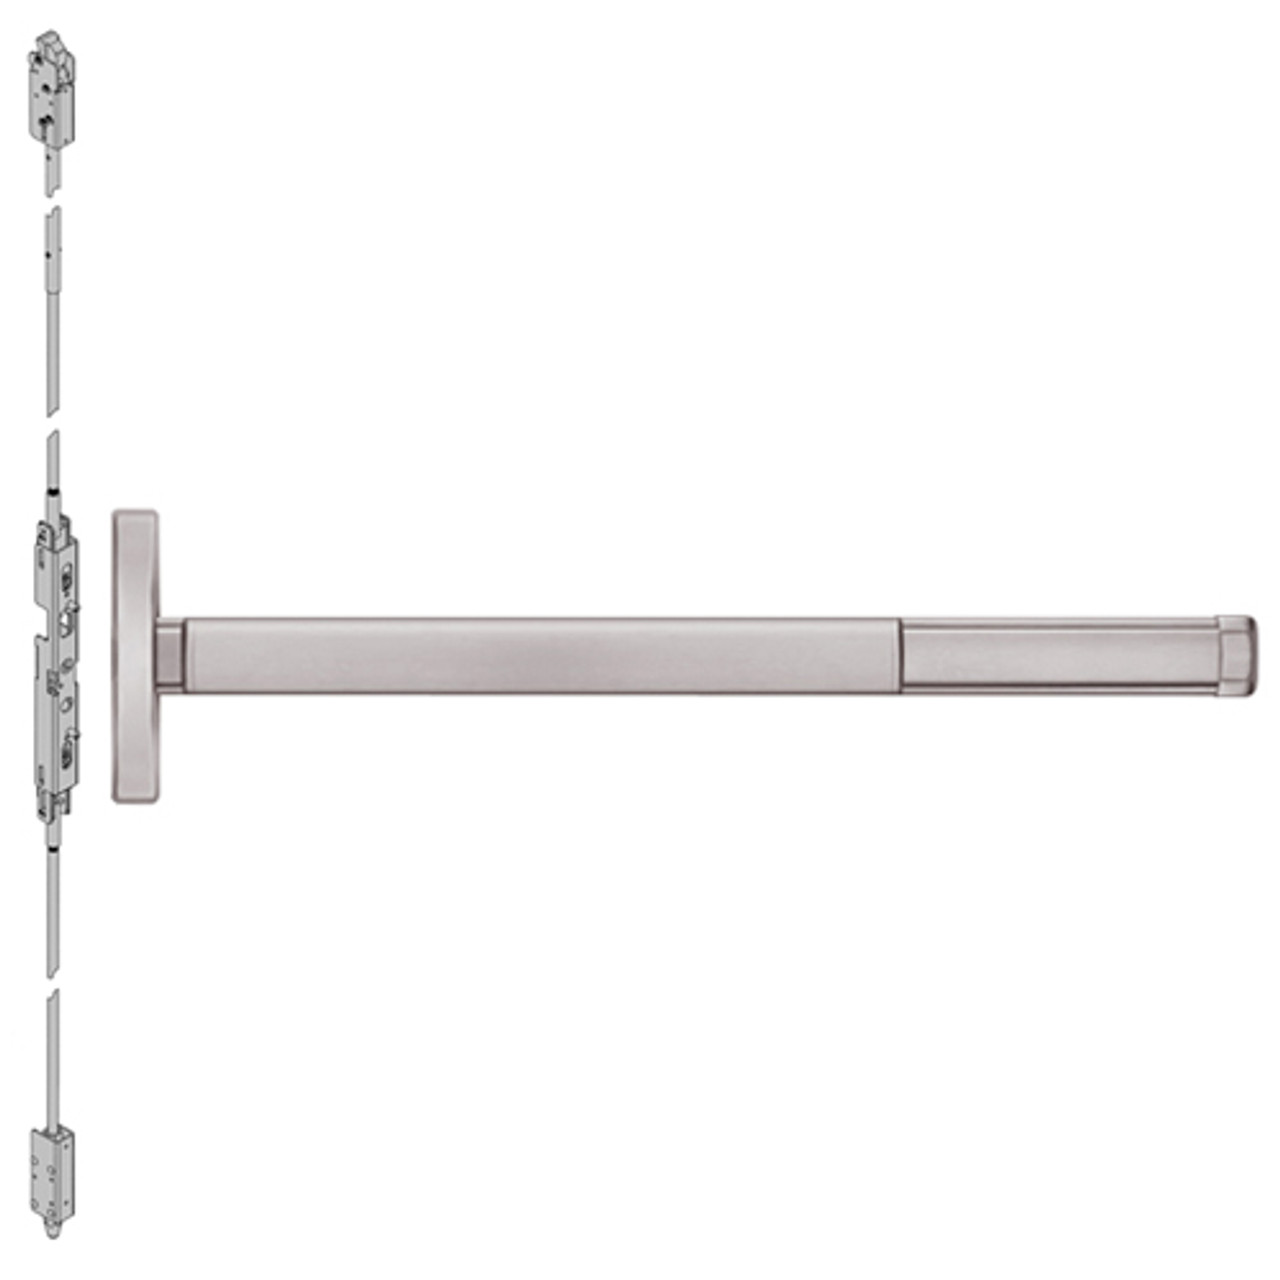 FL2601LBR-628-48 PHI 2600 Series Fire Rated Concealed Vertical Rod Exit Device Prepped for Cover Plate with Less Bottom Rod in Satin Aluminum Finish